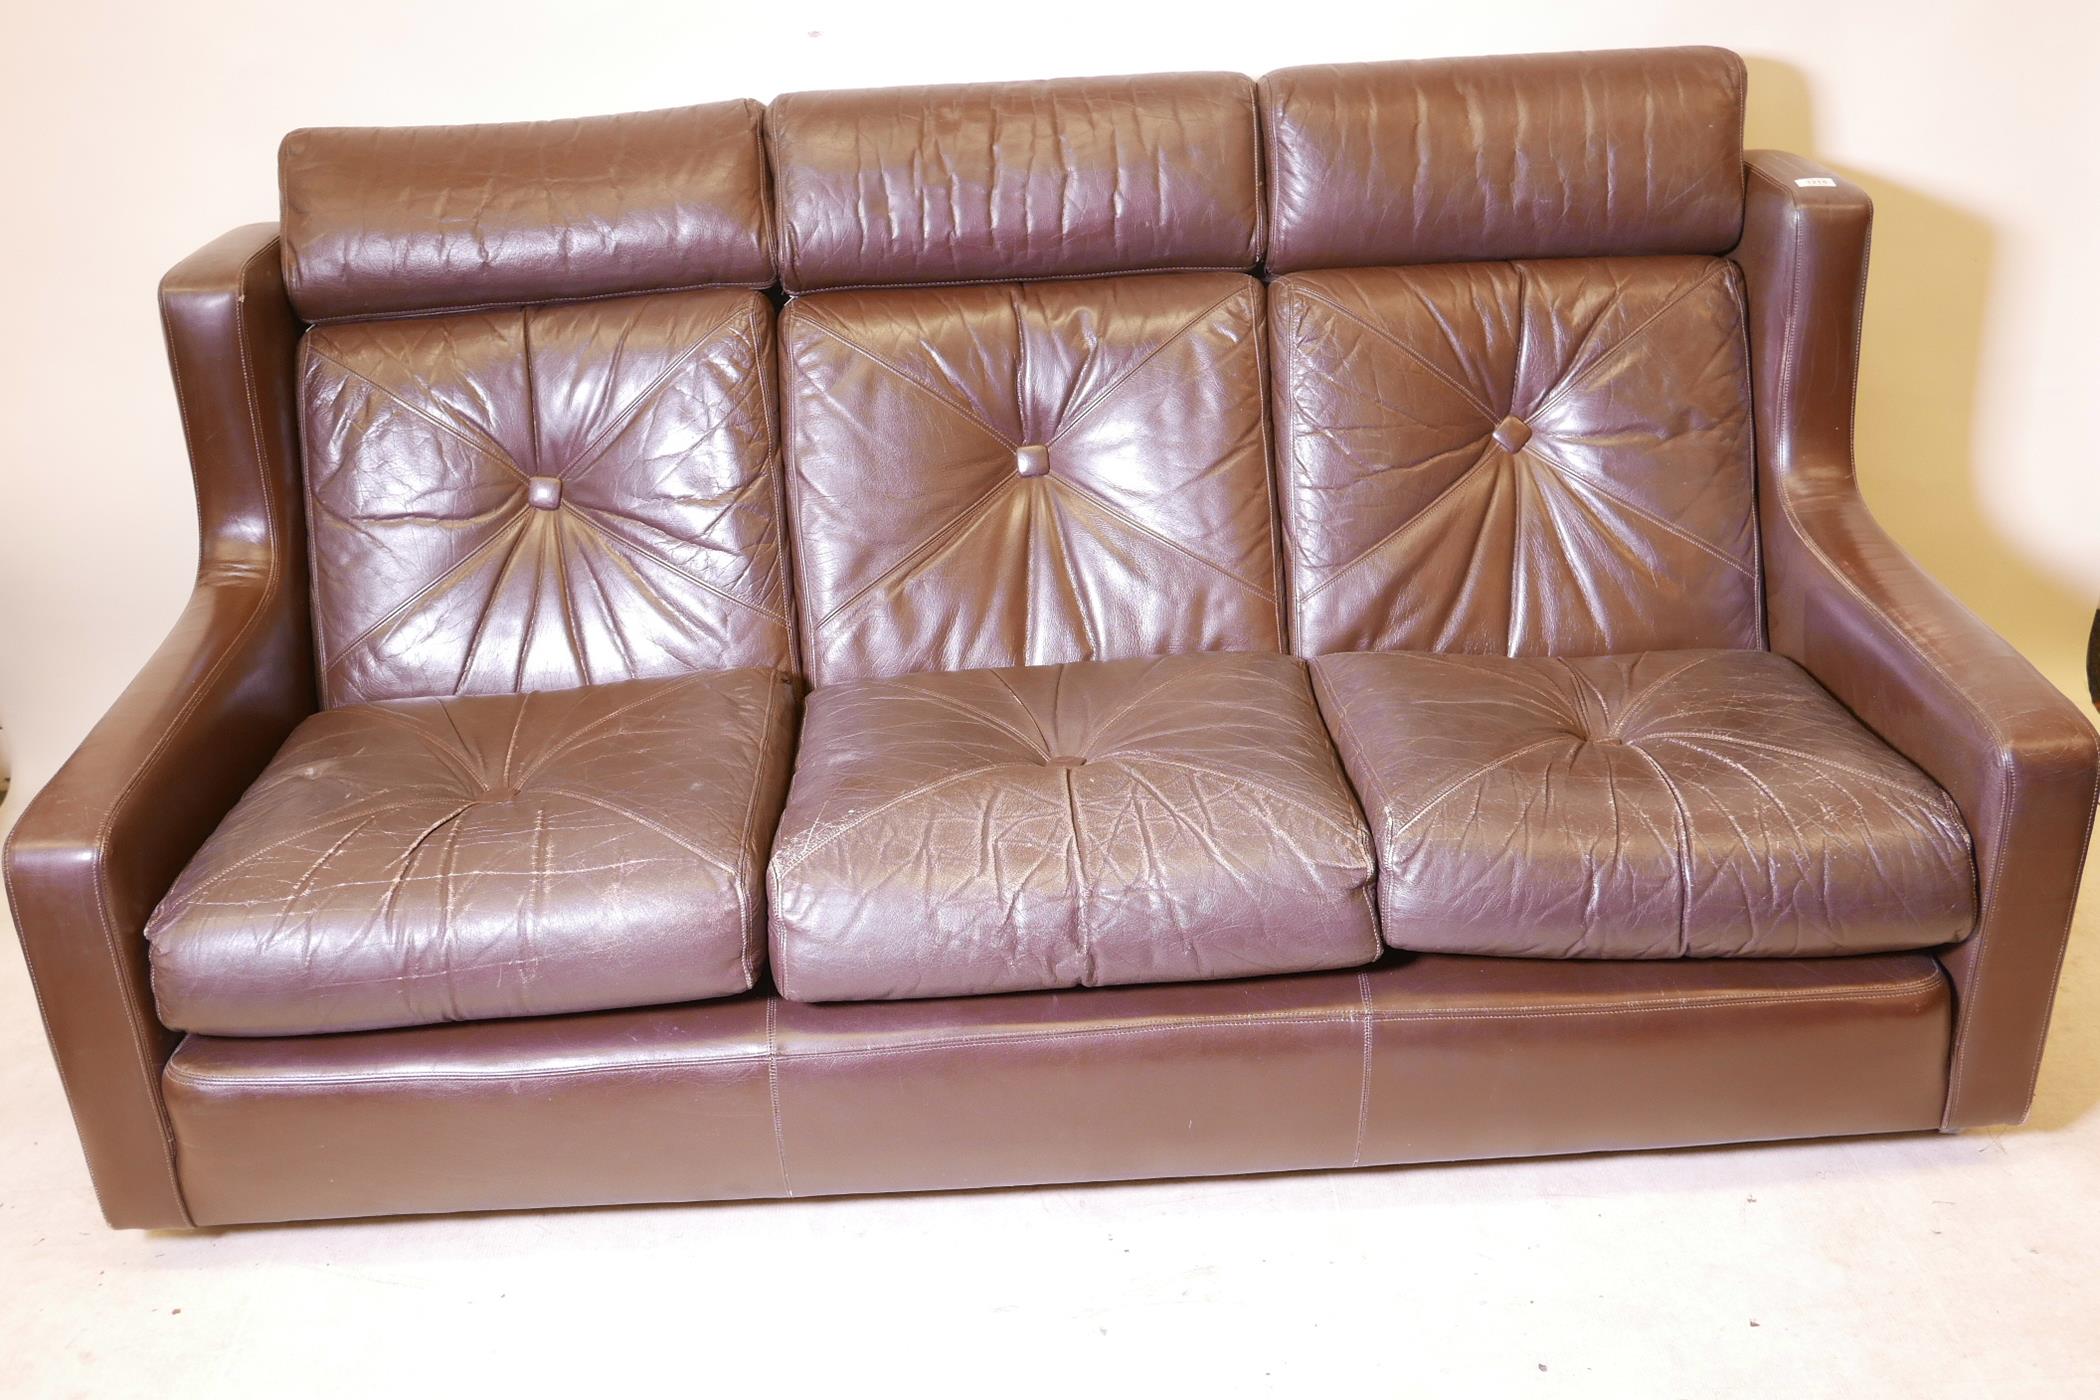 A contemporary three seater brown leather settee, 70" wide